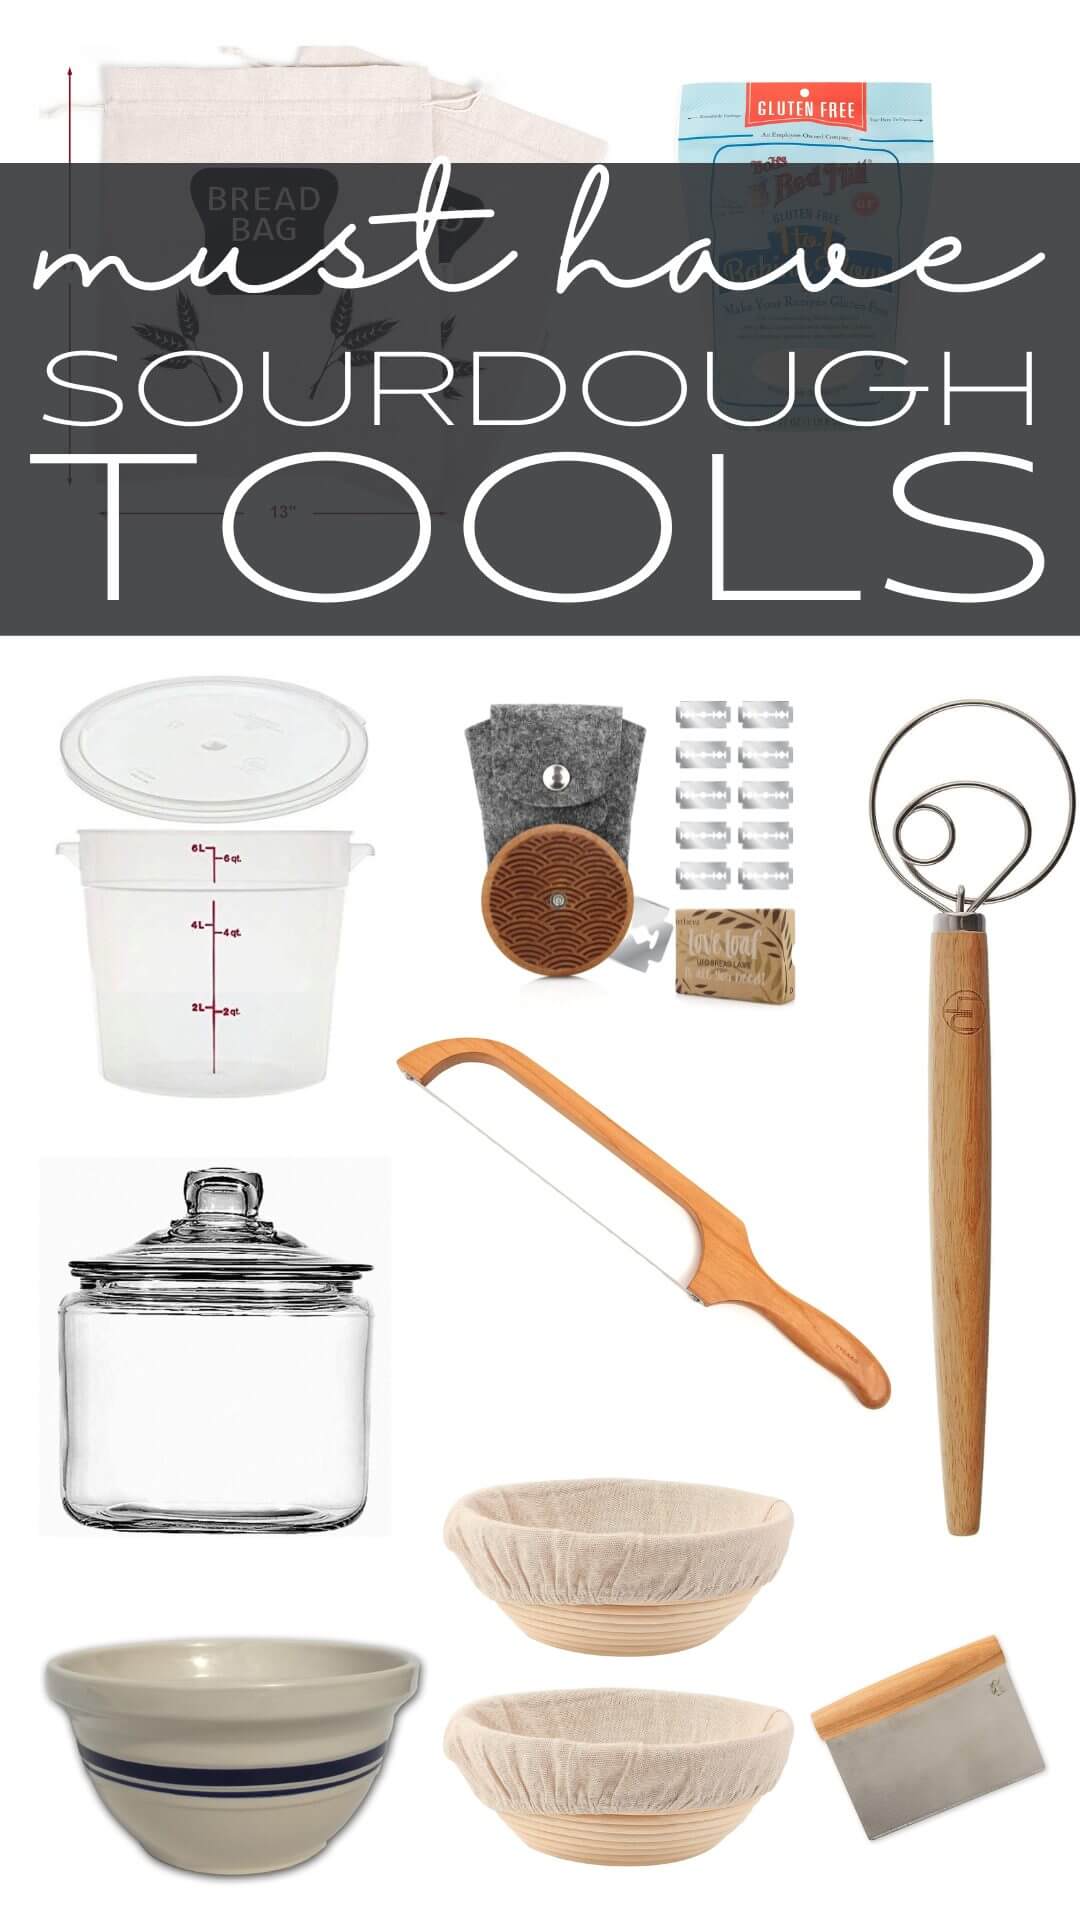 Amazing sourdough tools that make your sourdough baking process easier and more fun! Add some of these tools to your kitchen today!